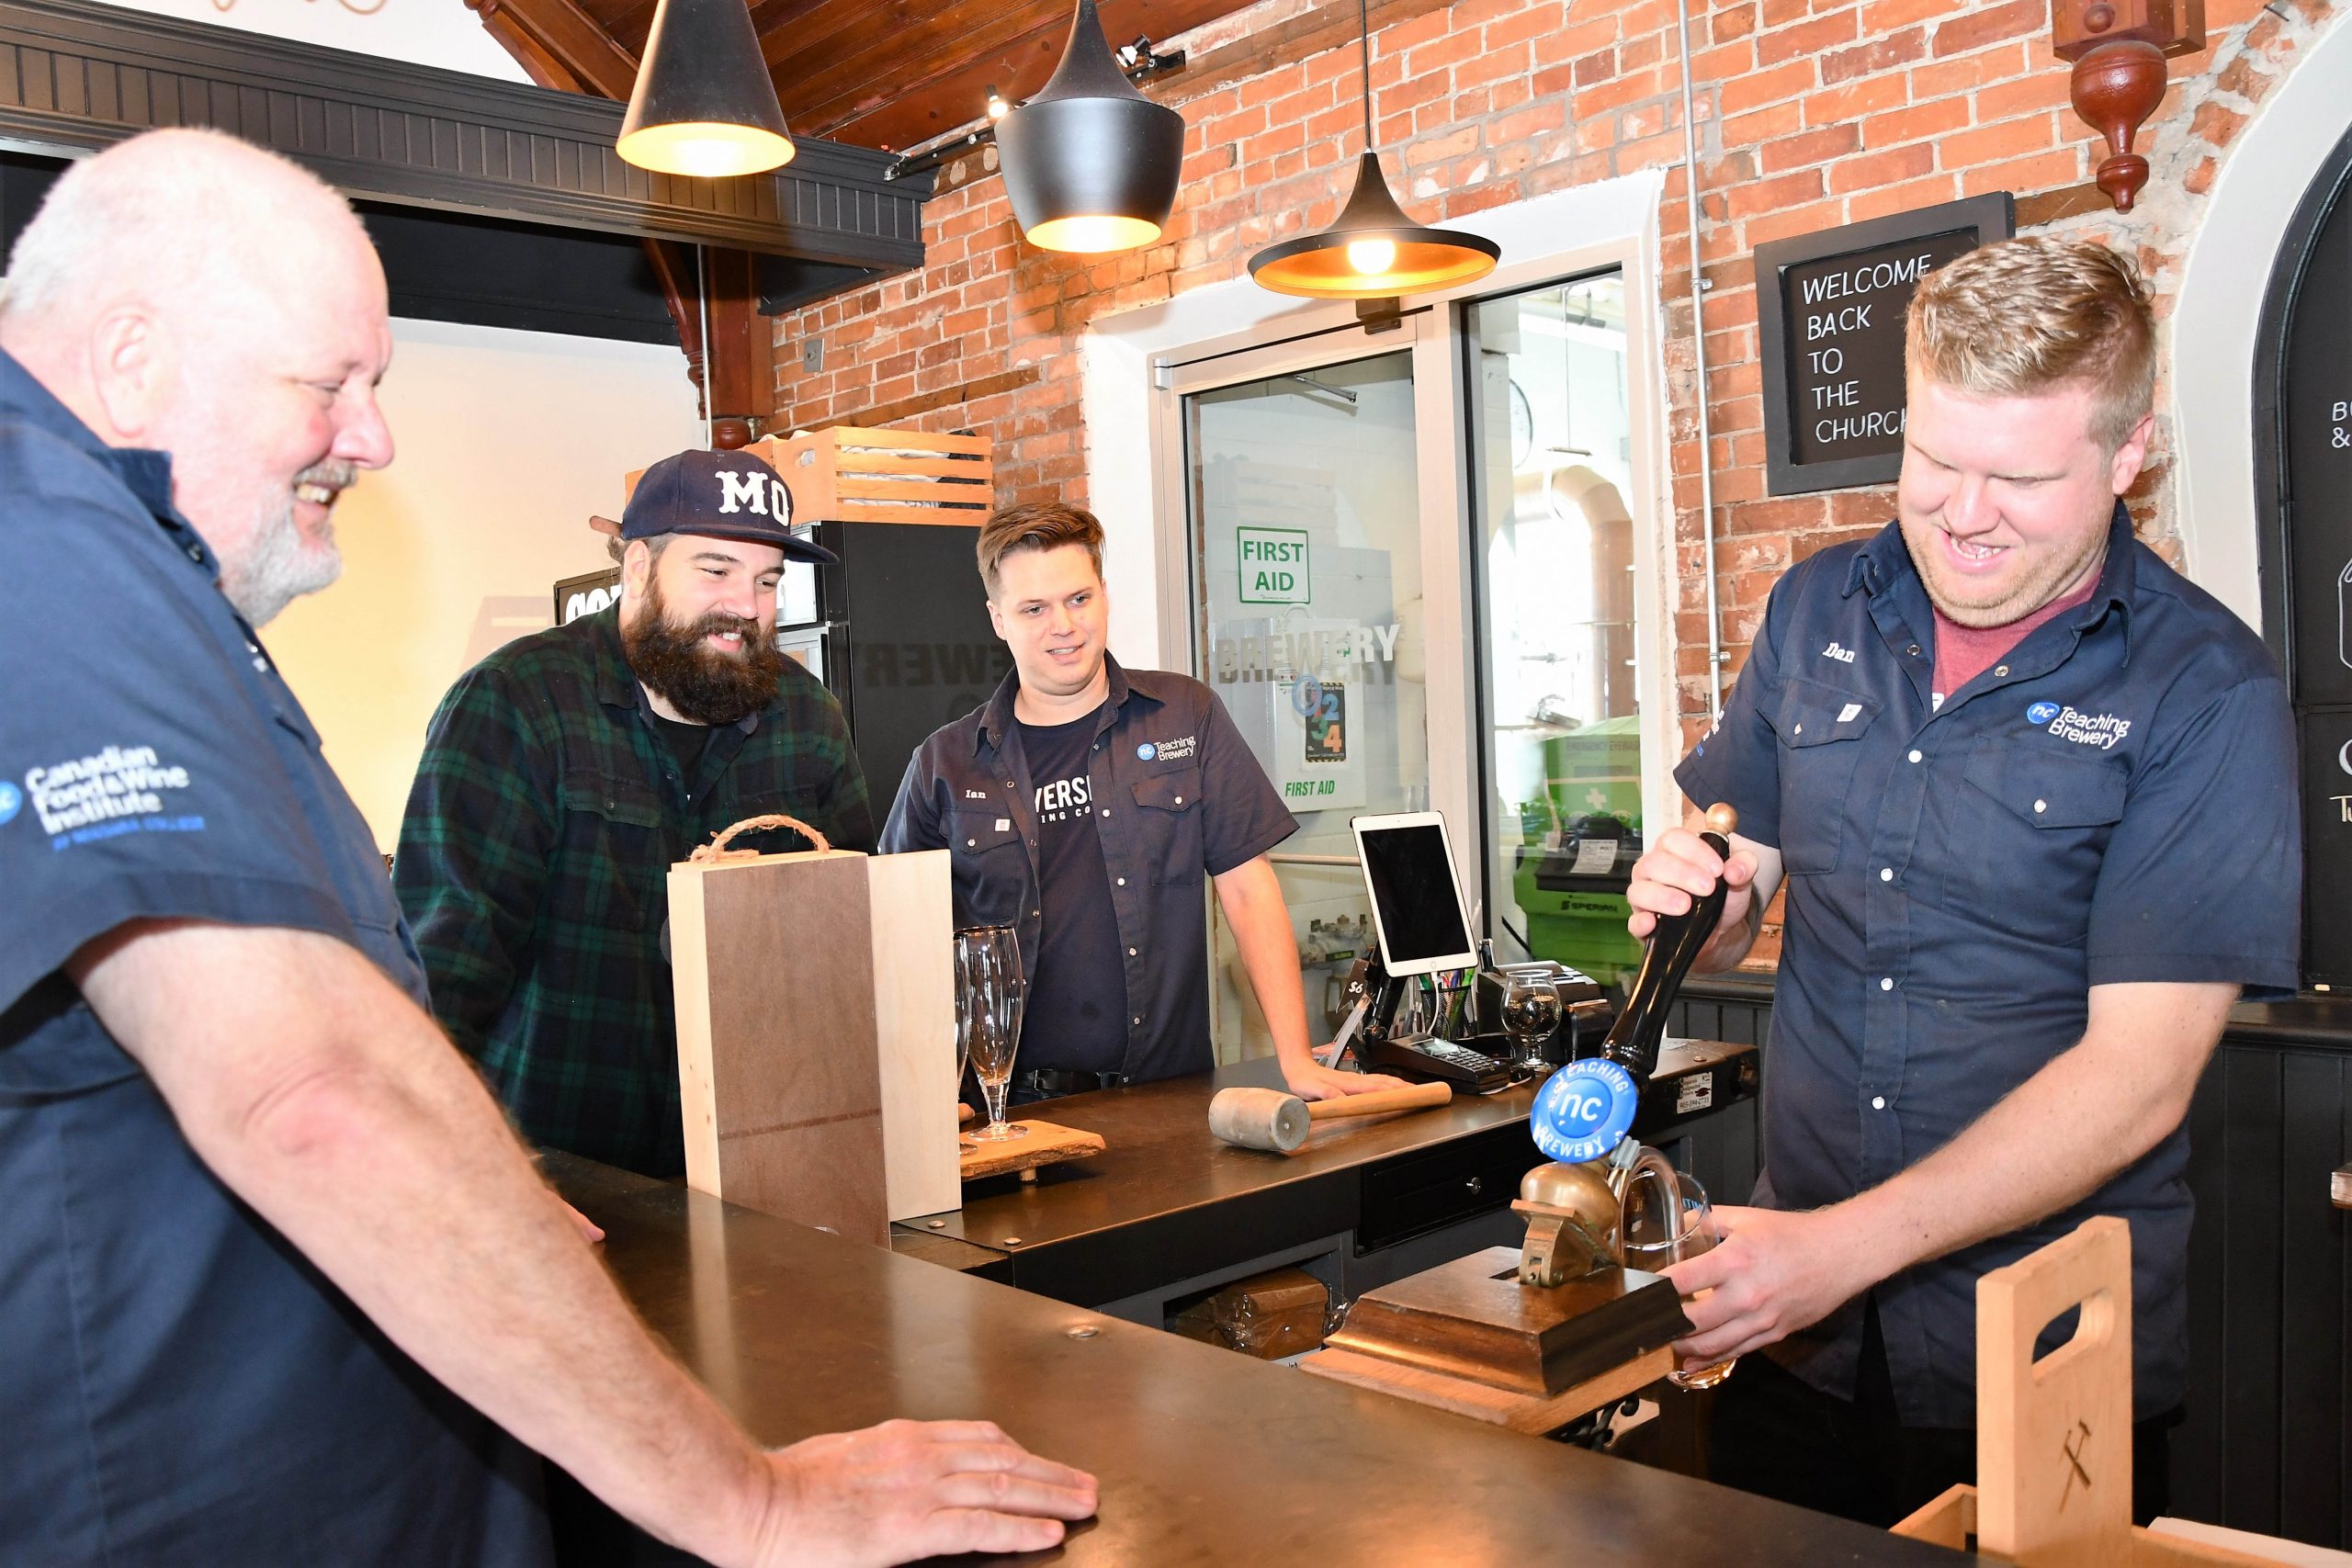 NC Brewmaster student Dan Clark pours a pint of his beer, Loggerhead, from behind the bar at Silversmith as Jon Downing (NC Brewmaster professor), Ben Goerzen (Silversmith marketing and communications), and Ian Evans (NC Brewmaster student) look on.